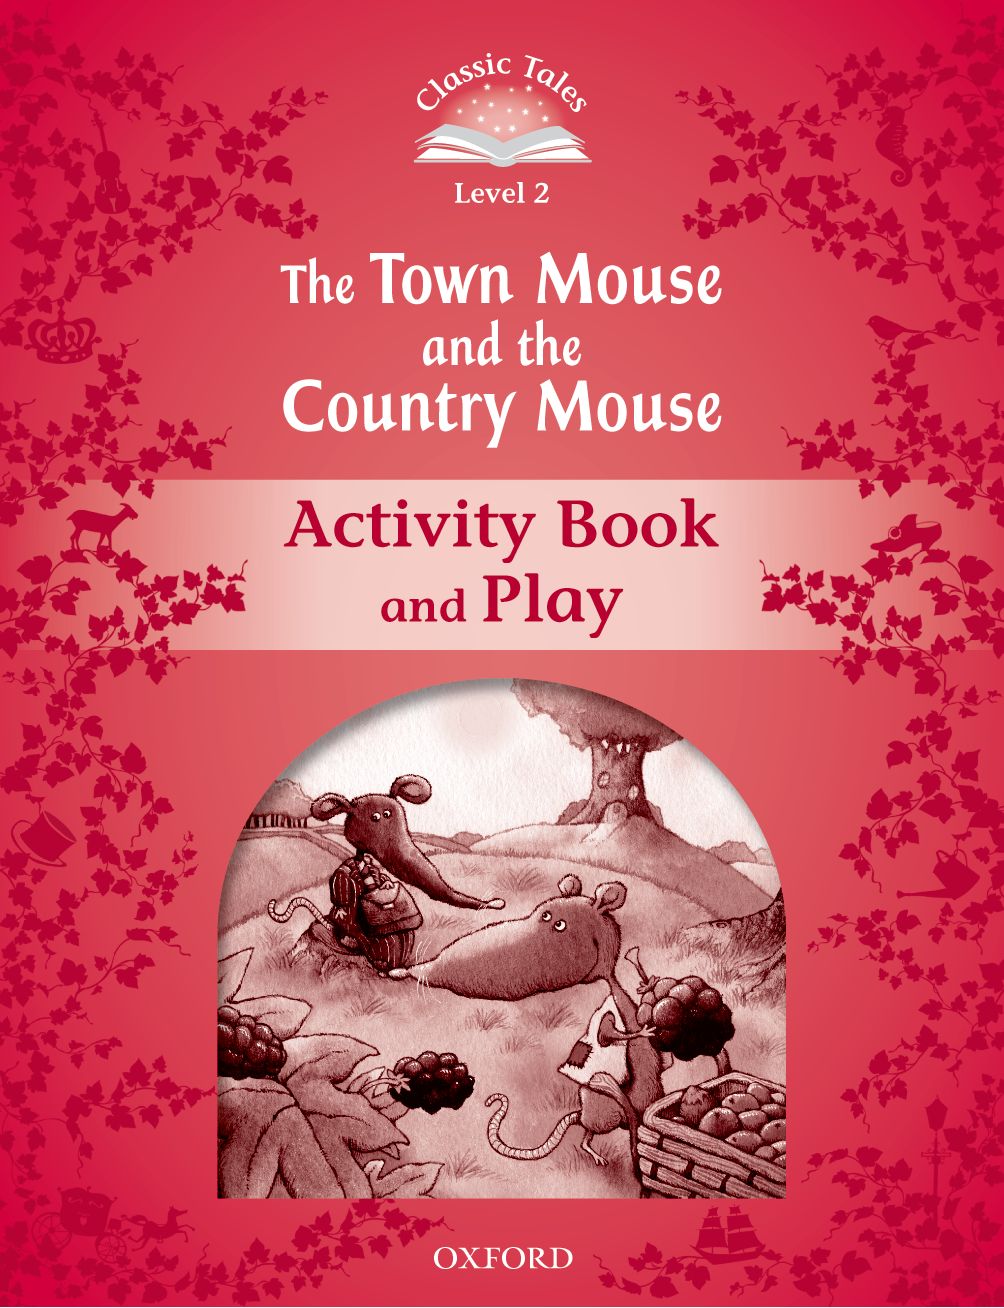 The Town Mouse and The Country Mouse Activity Book and Play